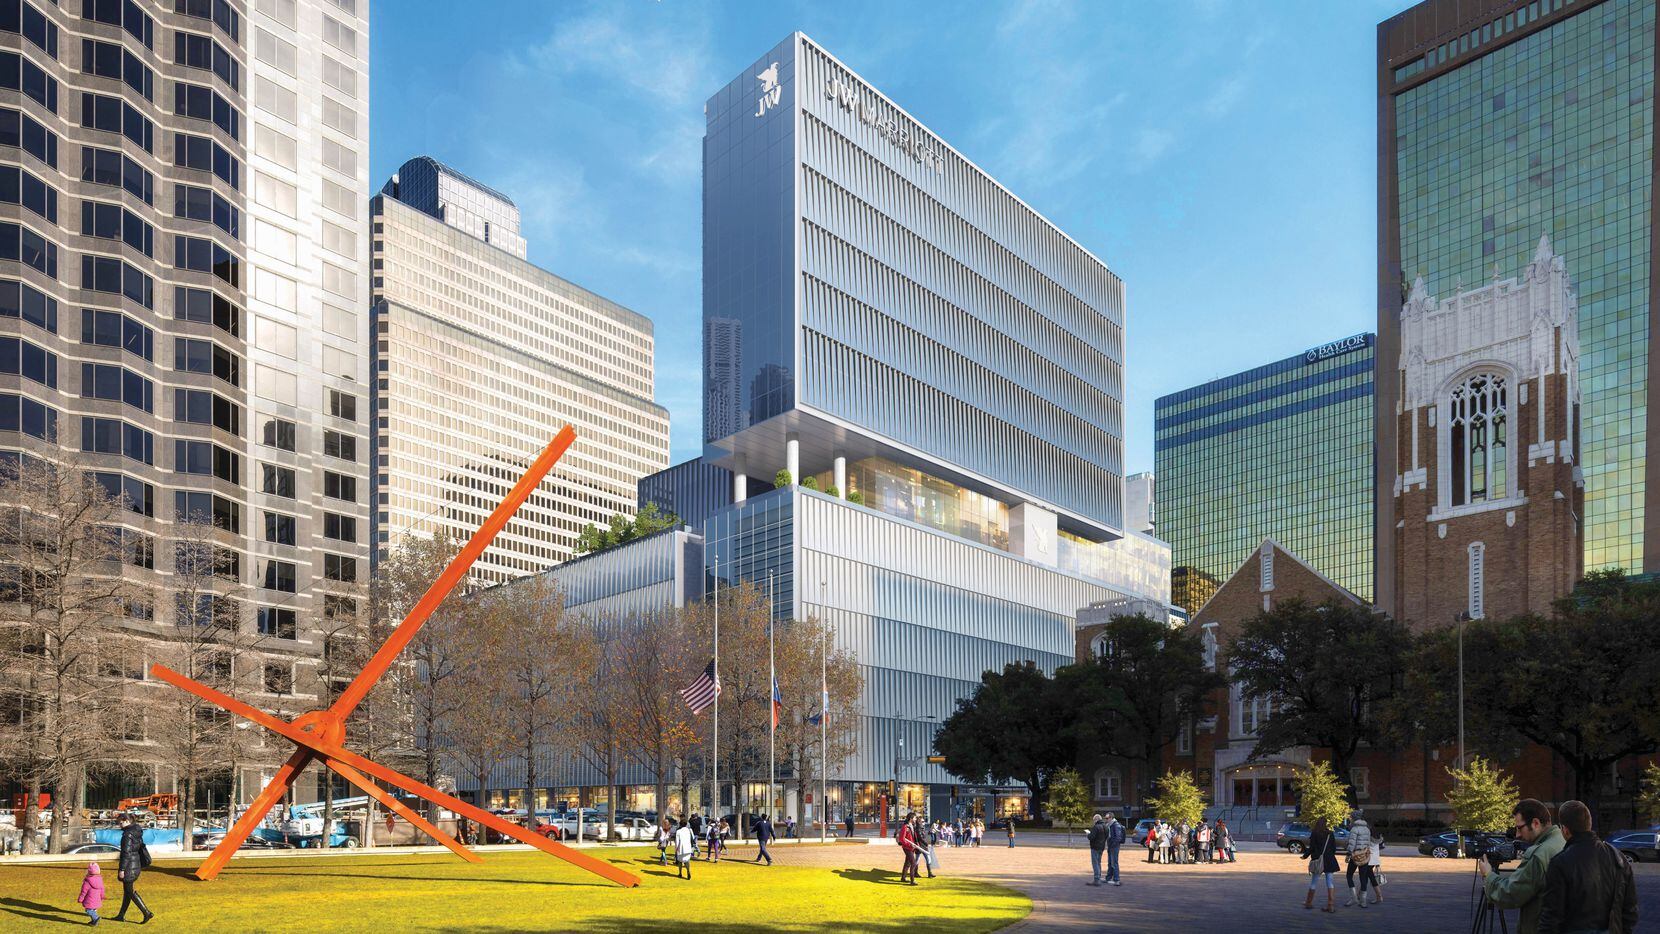 The Moon Group's new hotel will be across from the Dallas Museum of Art.